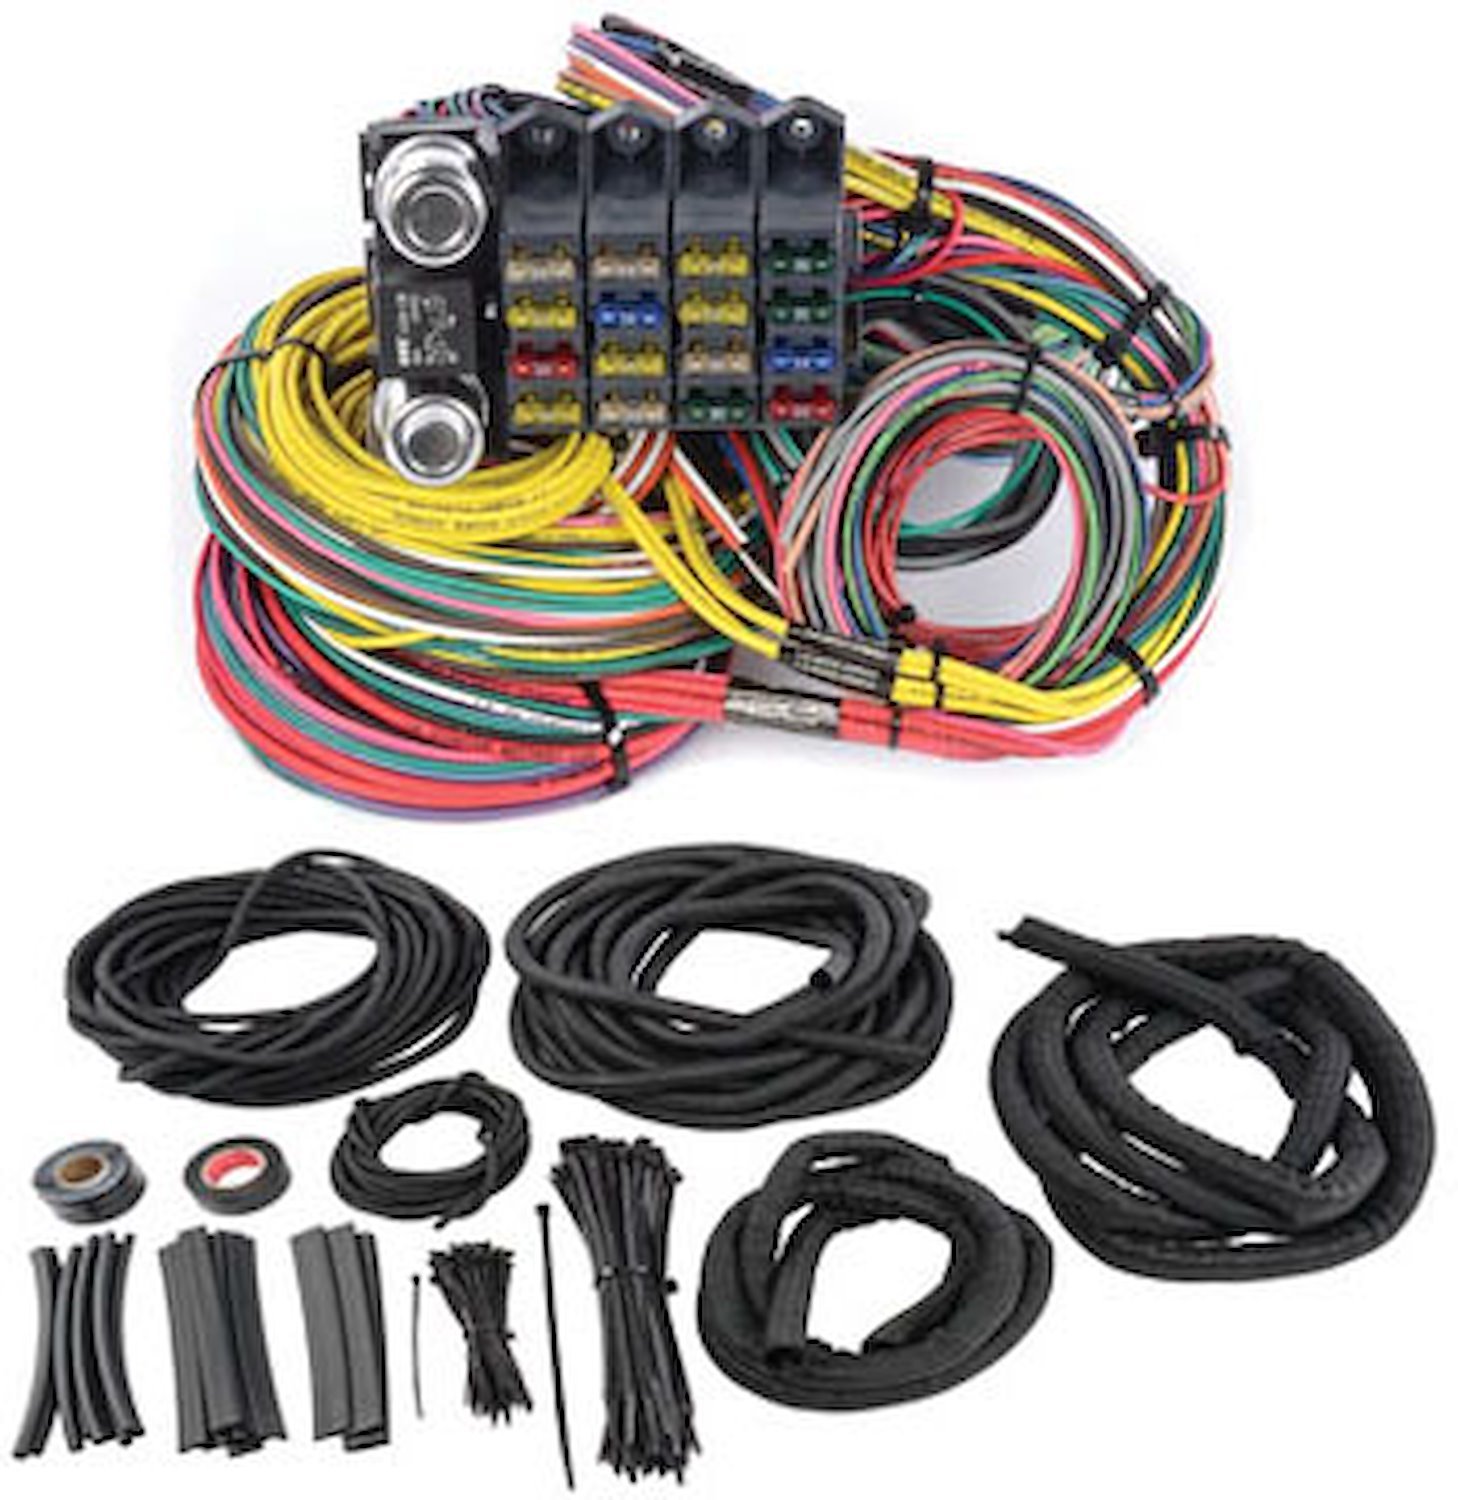 Universal Wiring Harness & Woven Braid Chassis Kit 20-Circuit